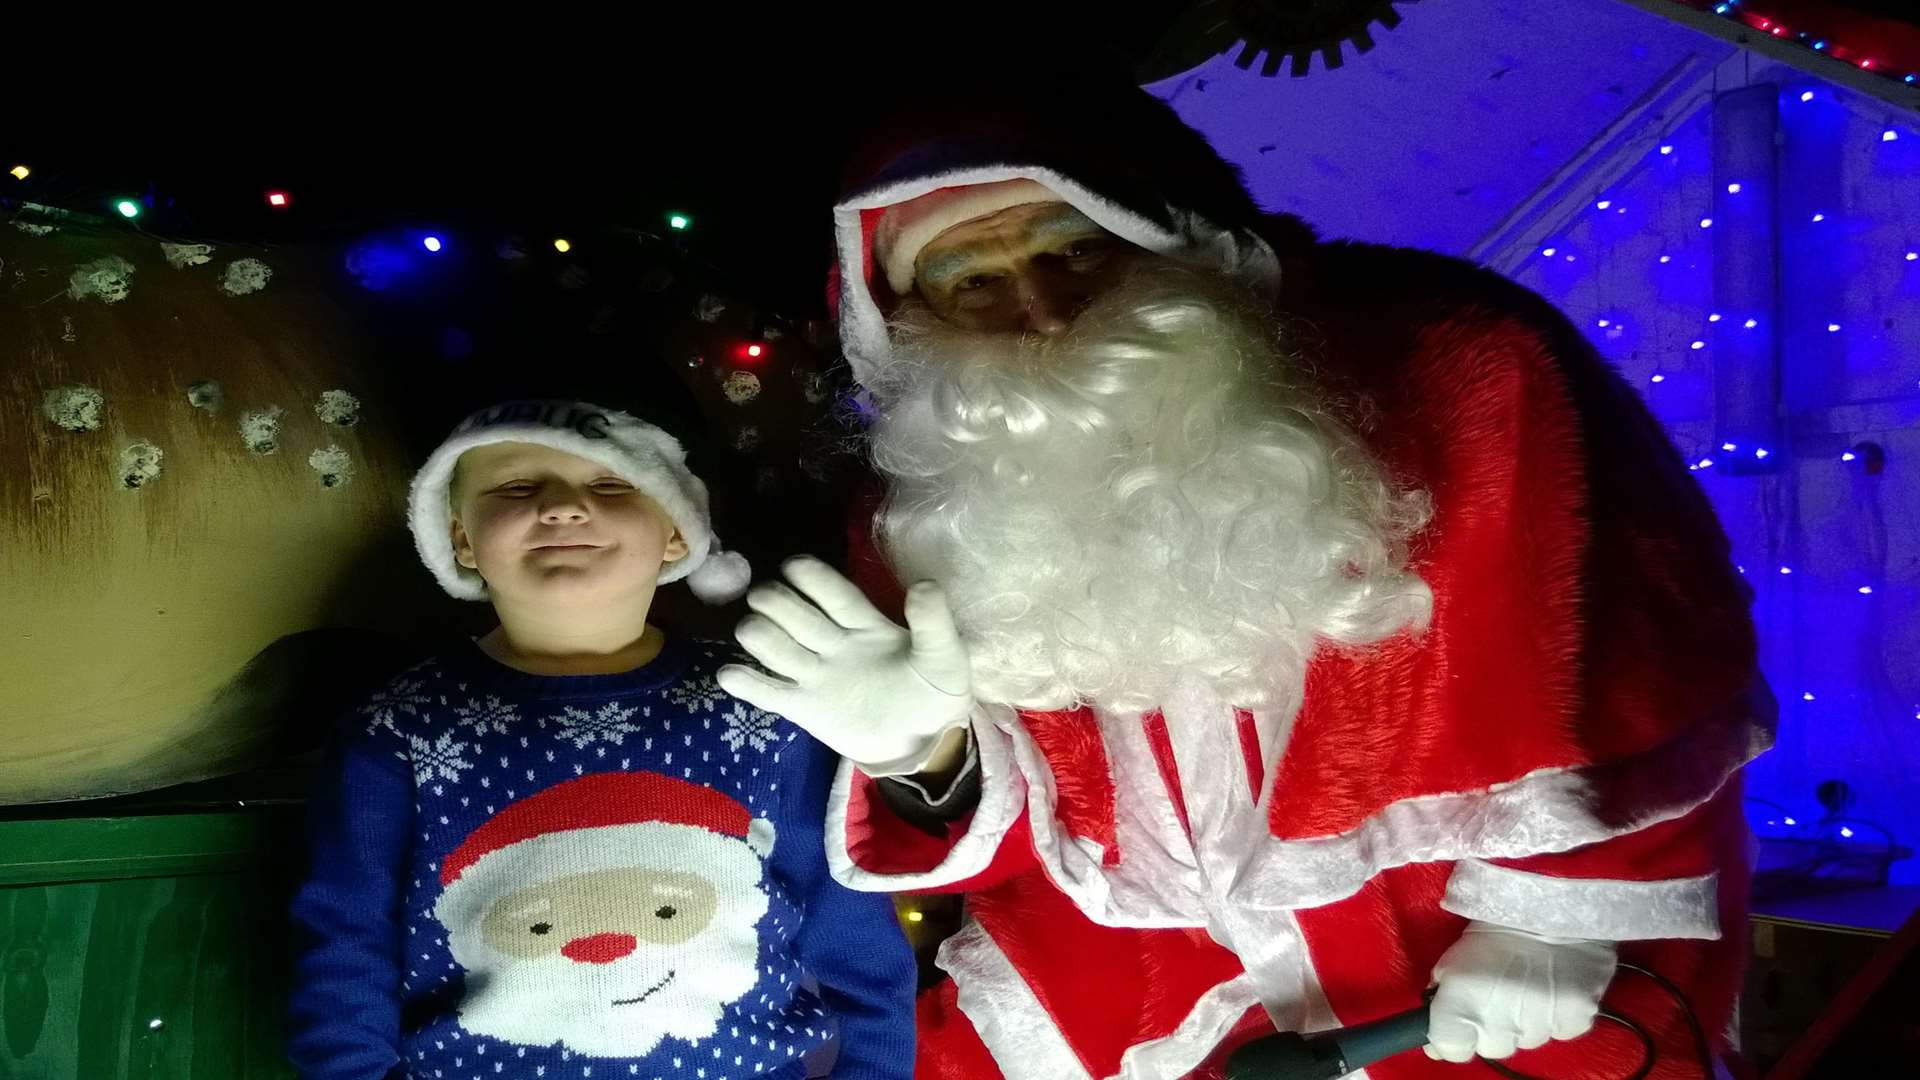 Youngster Matthew Locke met Father Christmas as he helped out the Folkestone Rotary Club in previous years